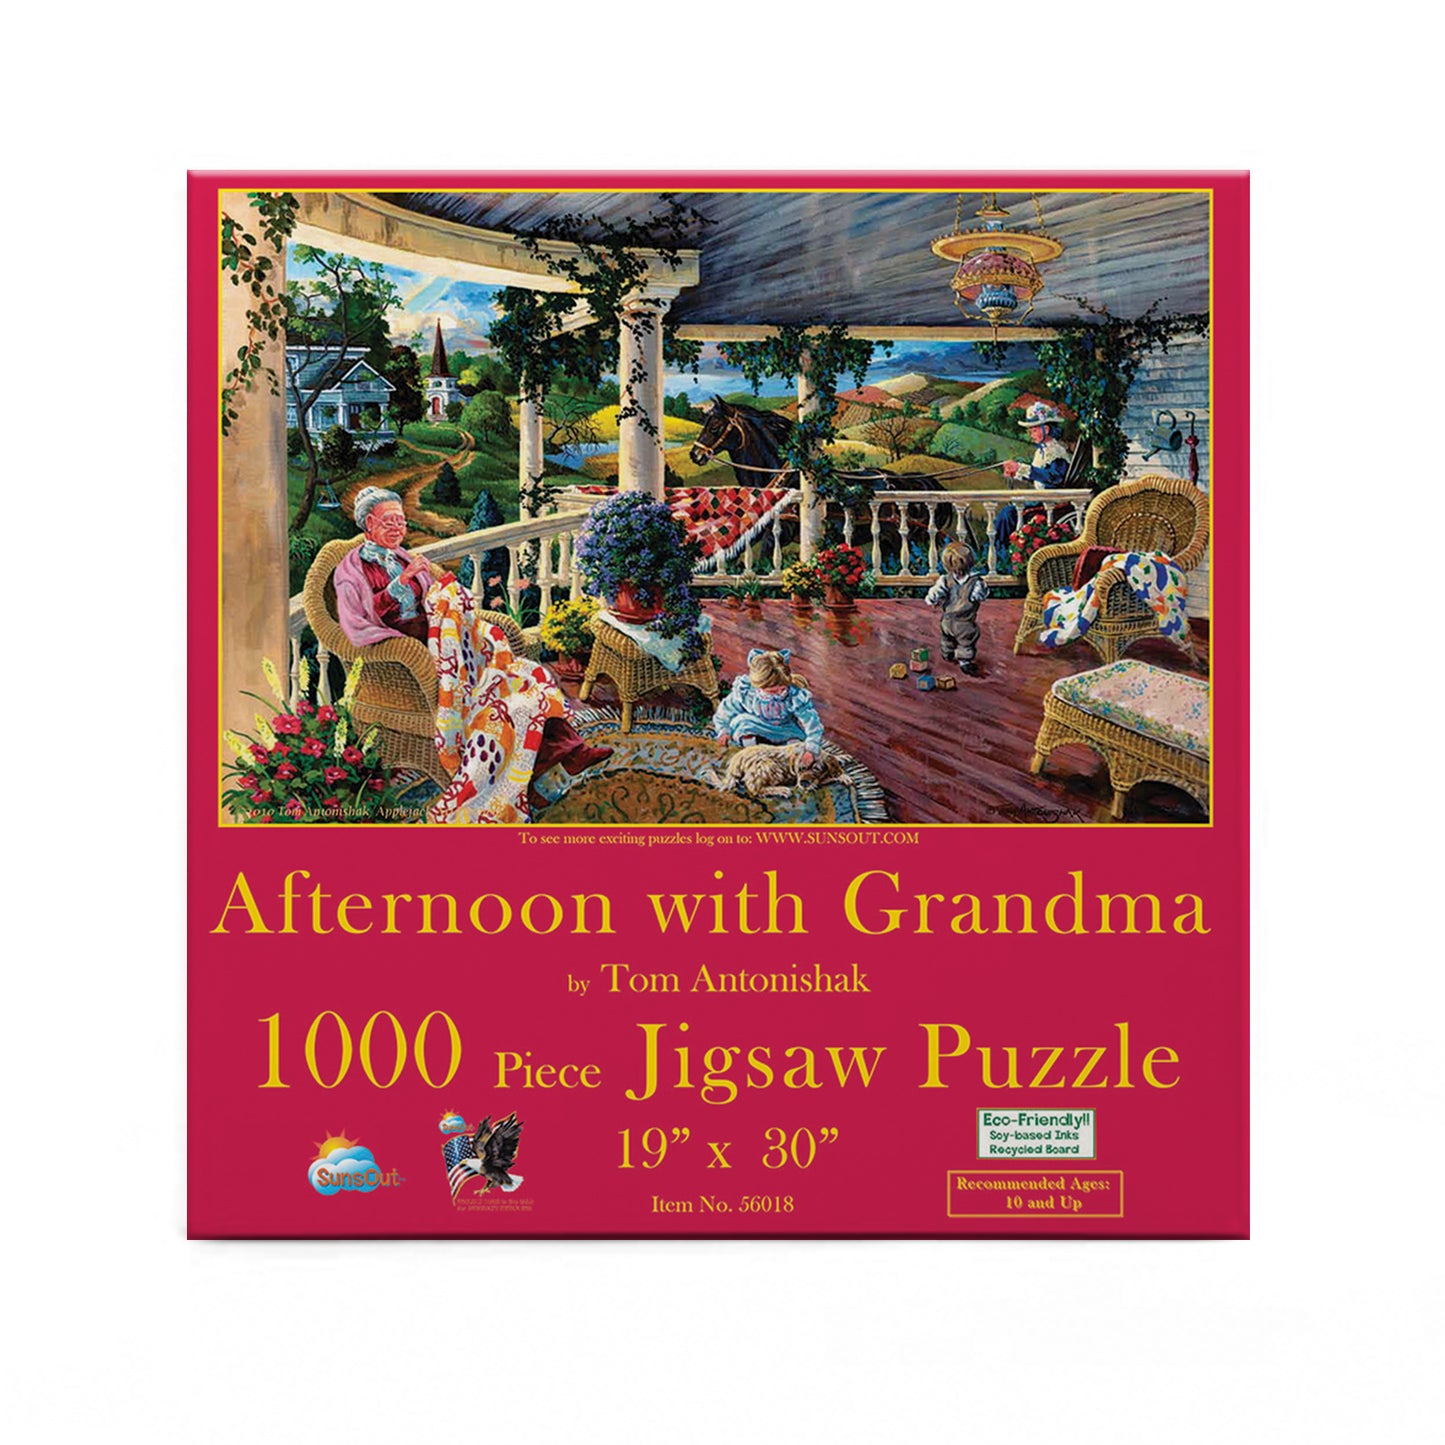 Afternoon with Grandma (16) - 1000 Piece Jigsaw Puzzle